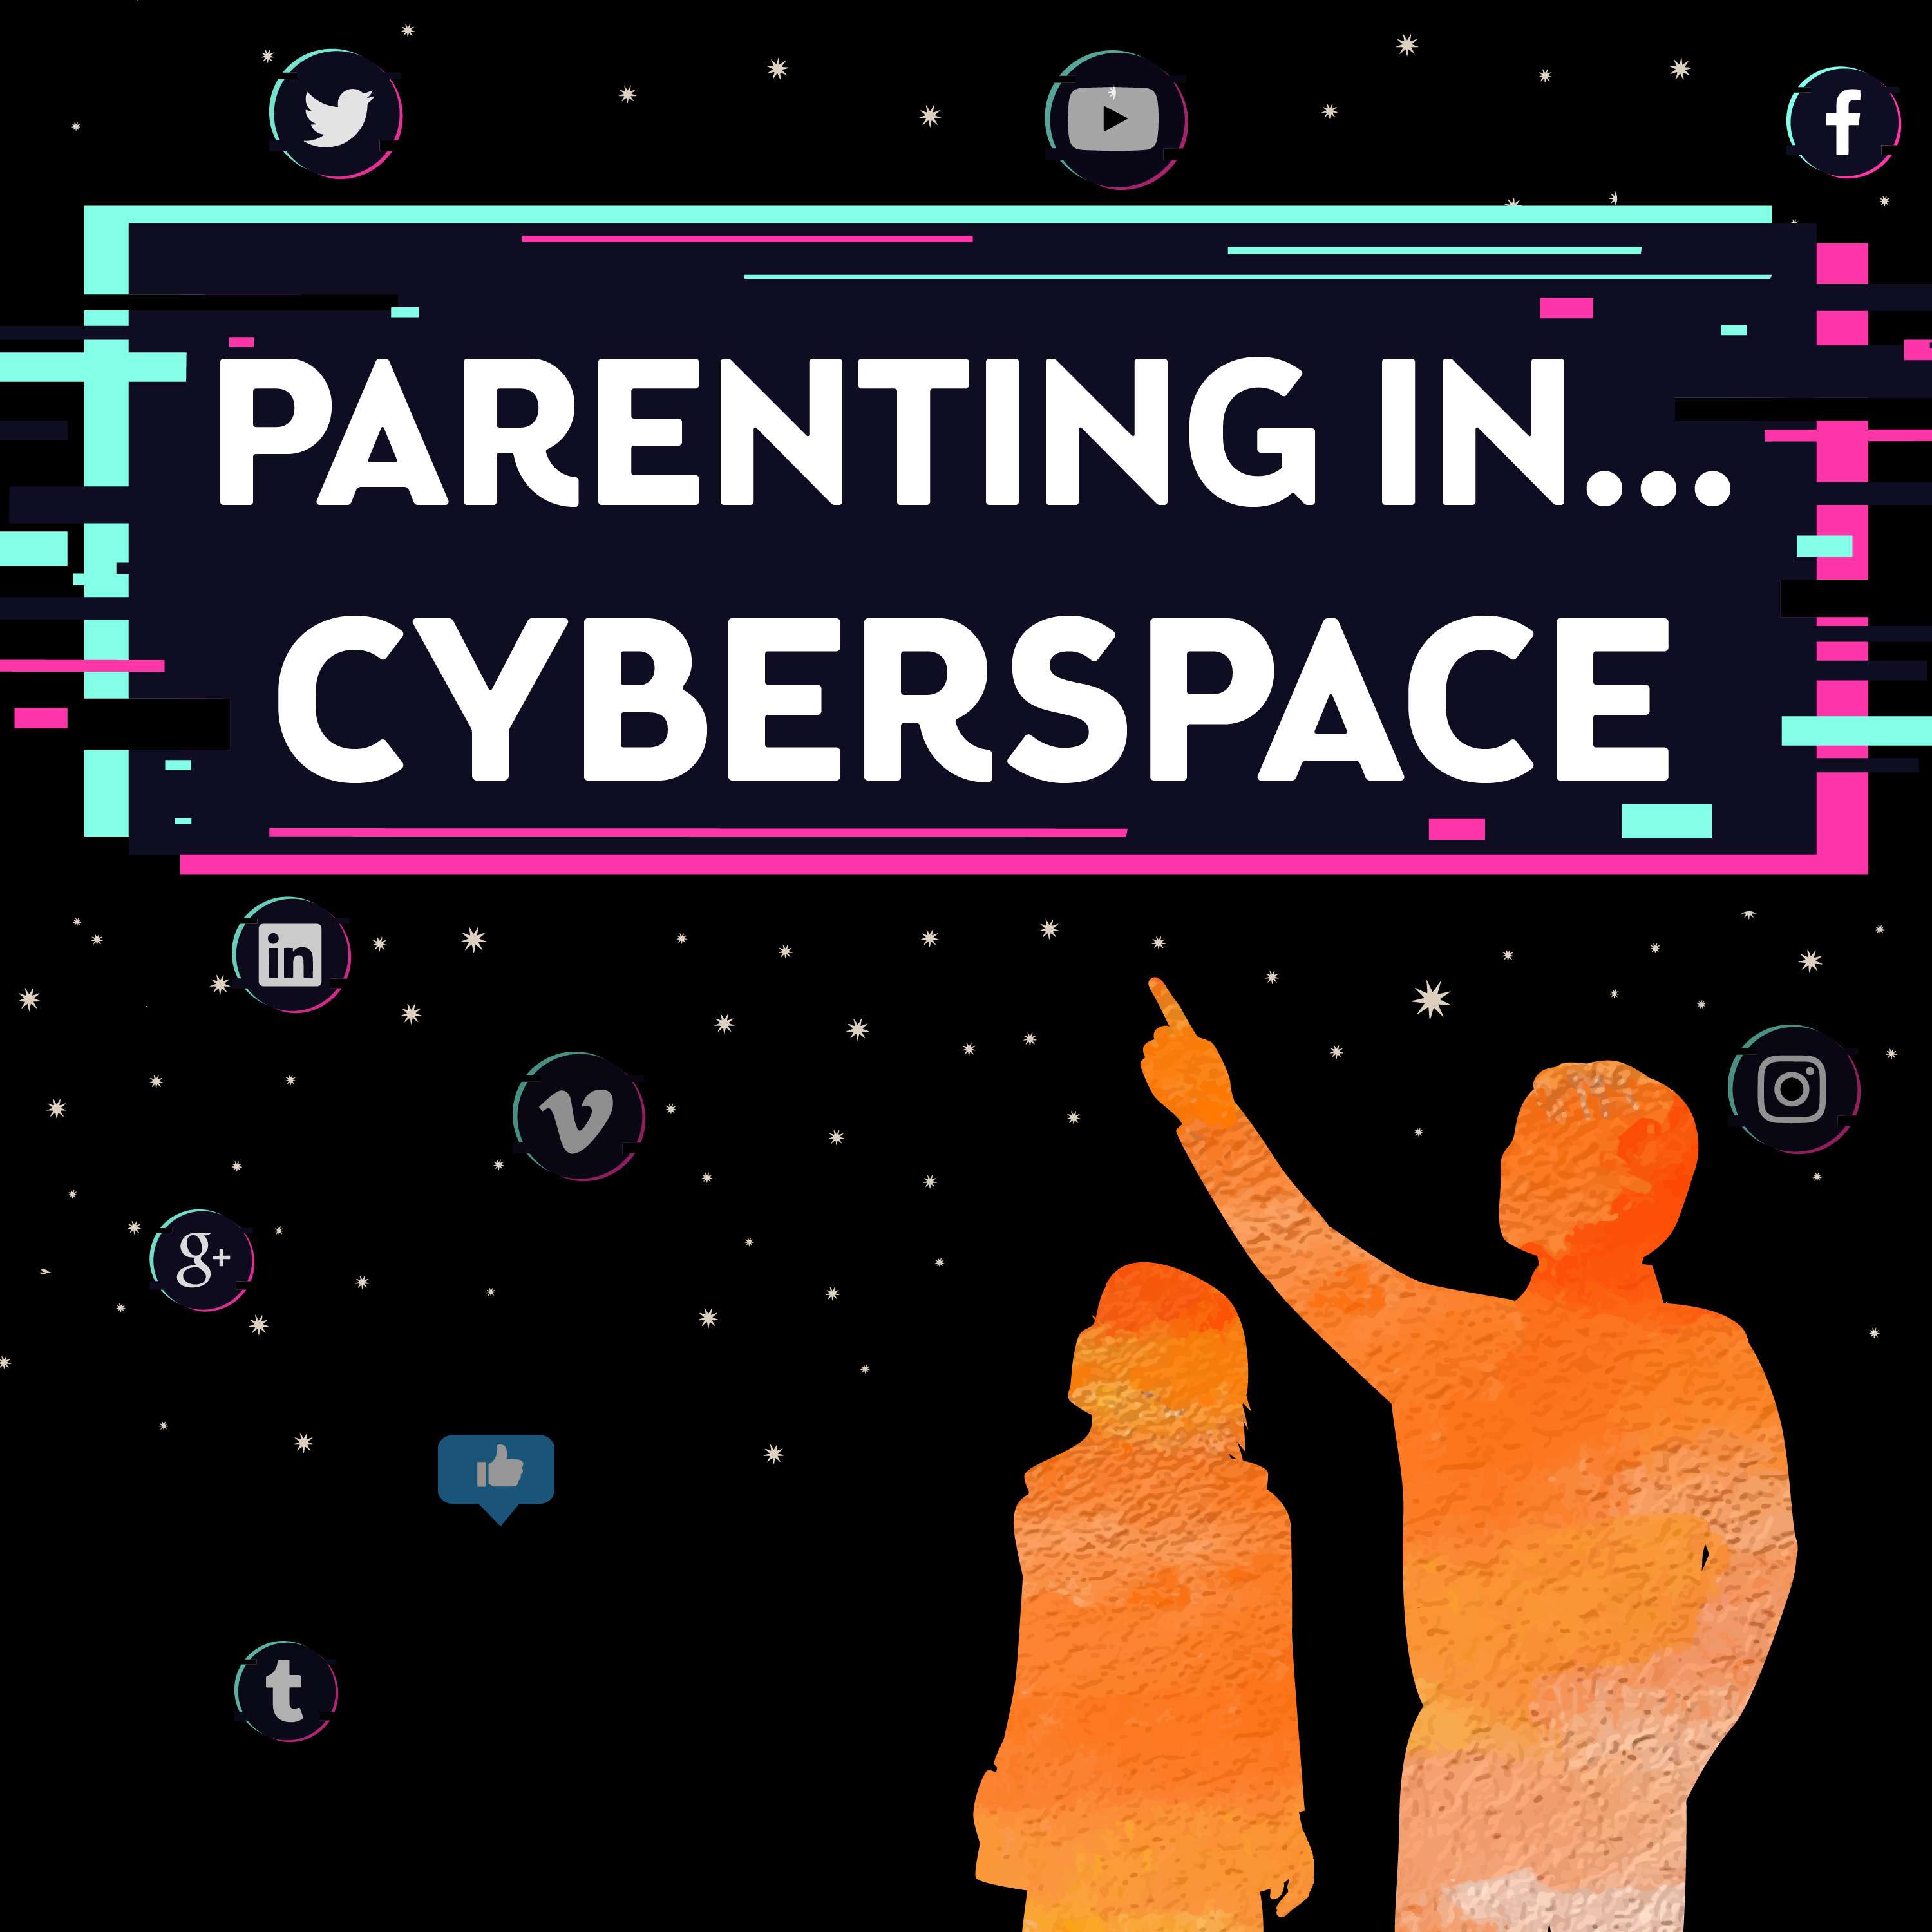 Parenting in Cyberspace